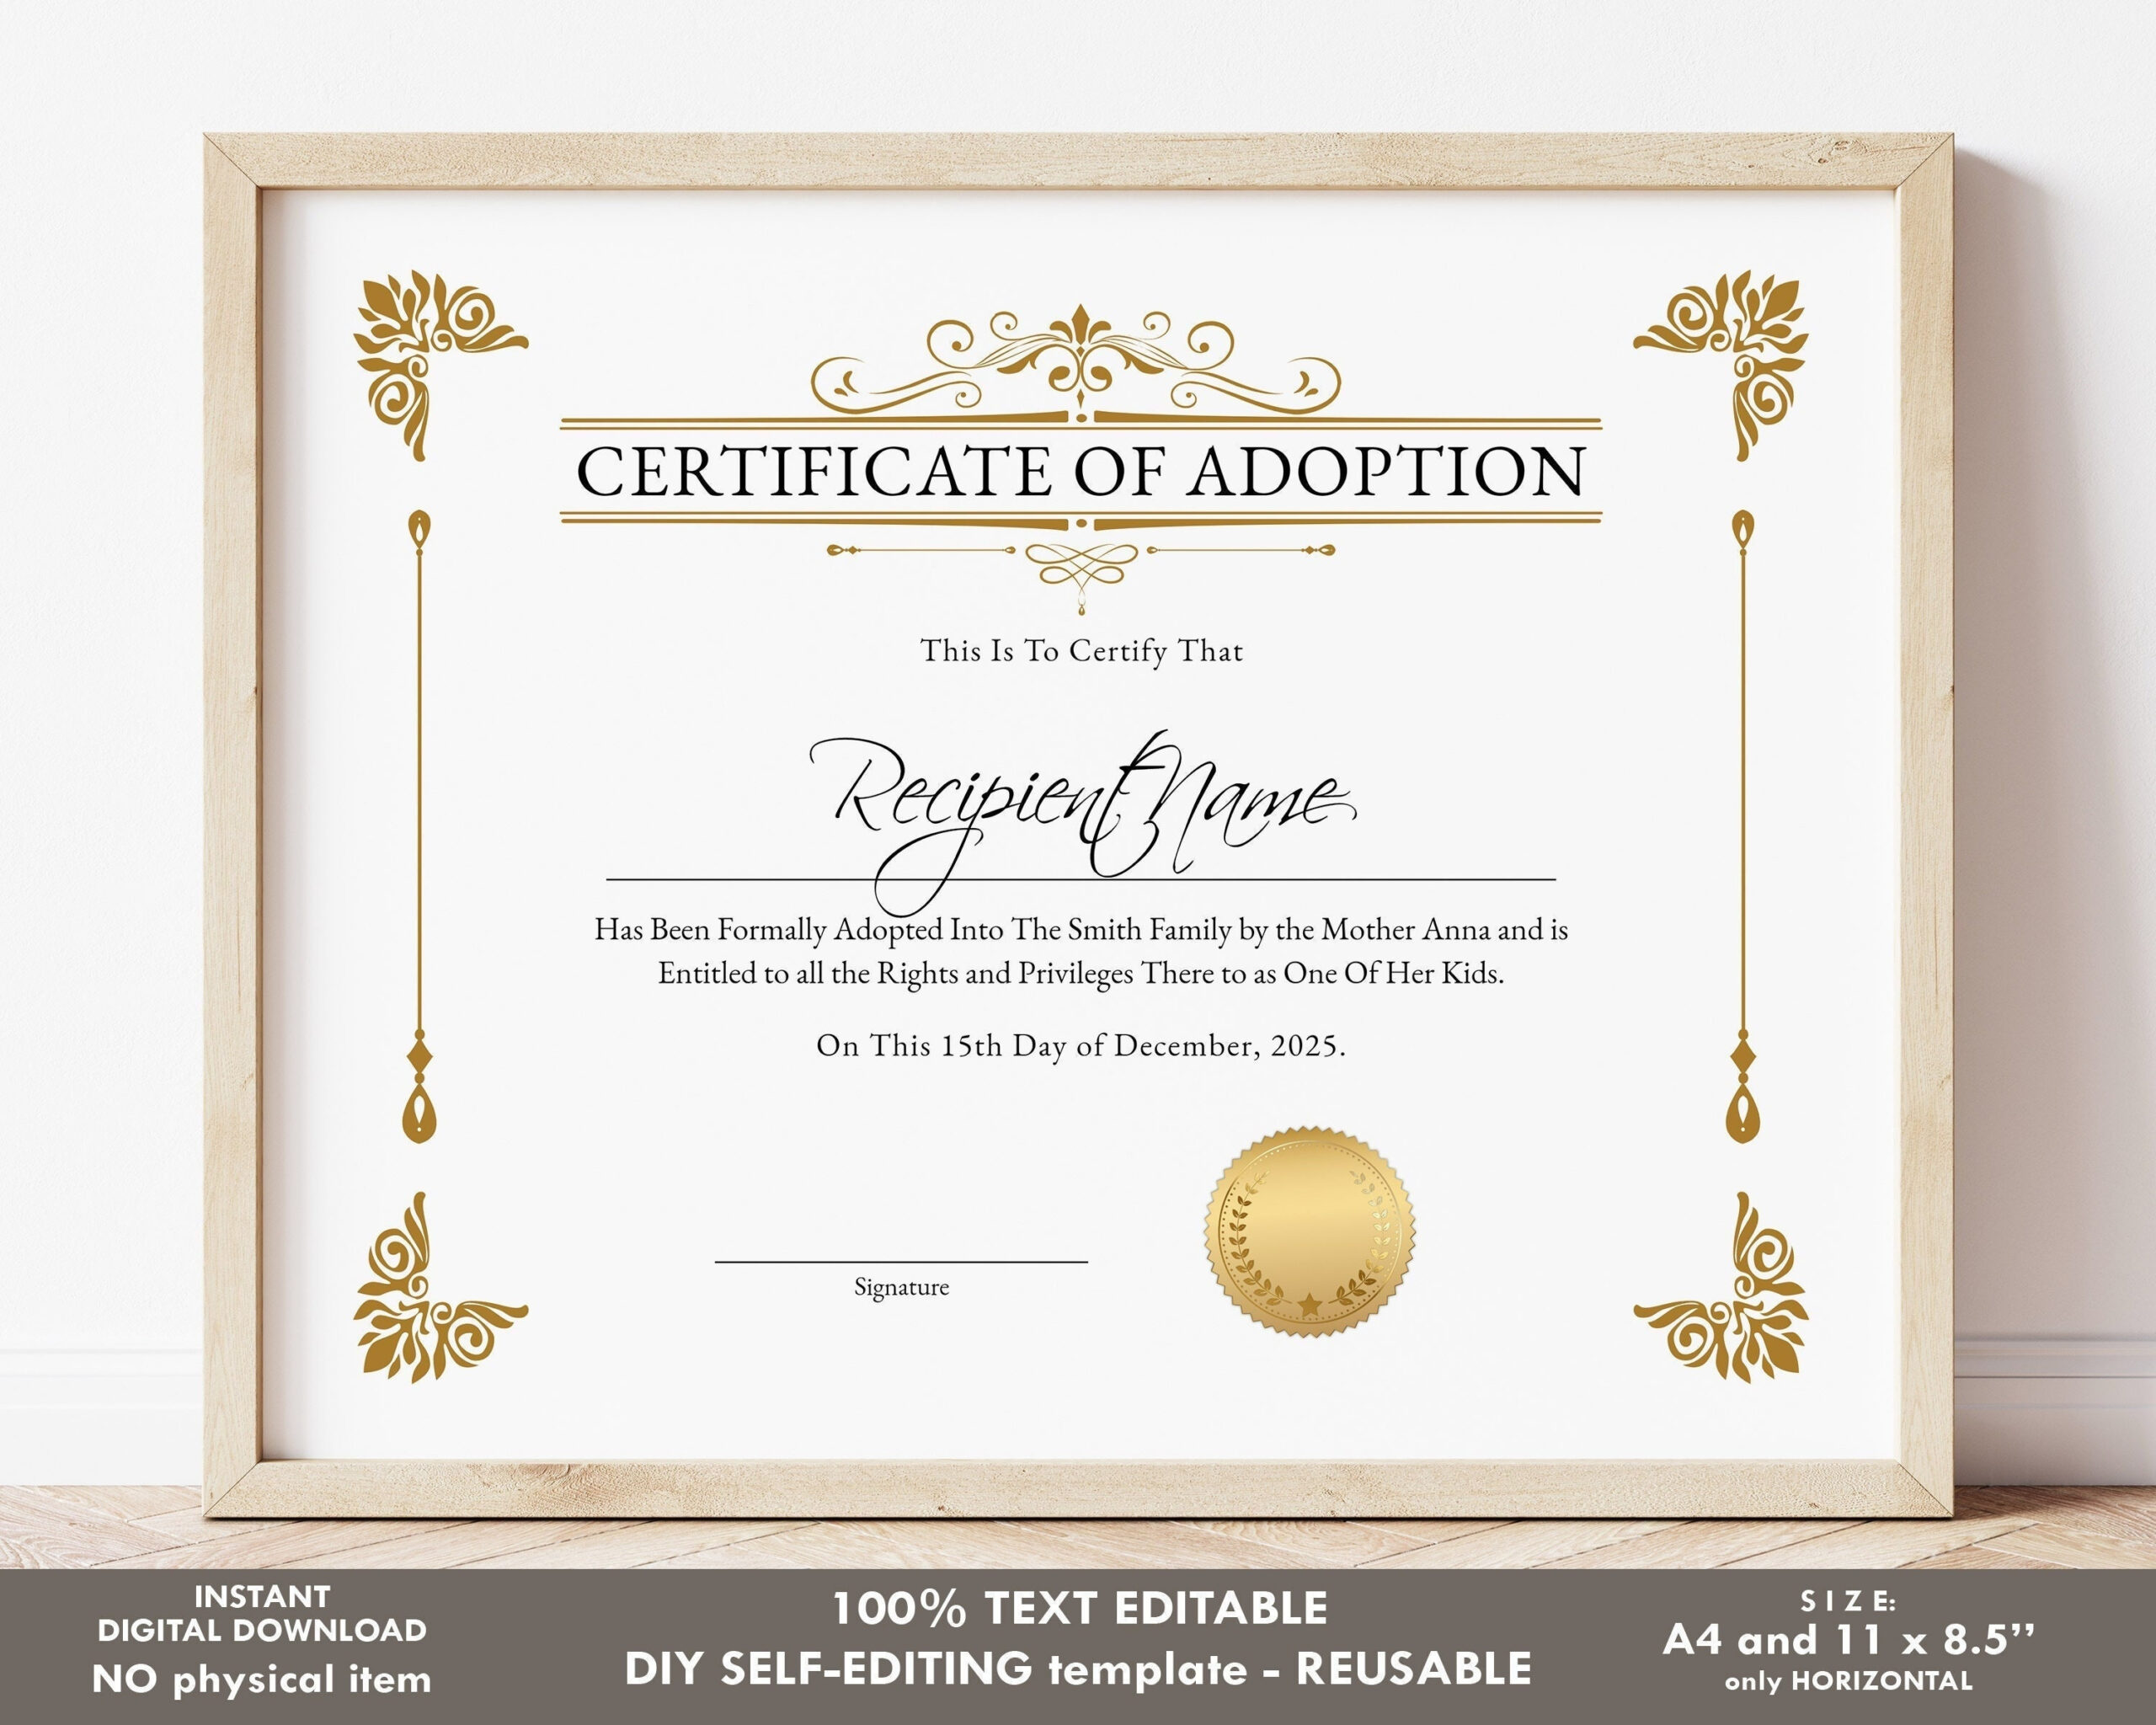 Certificate of Adoption to Our Family Editable Printable - Etsy